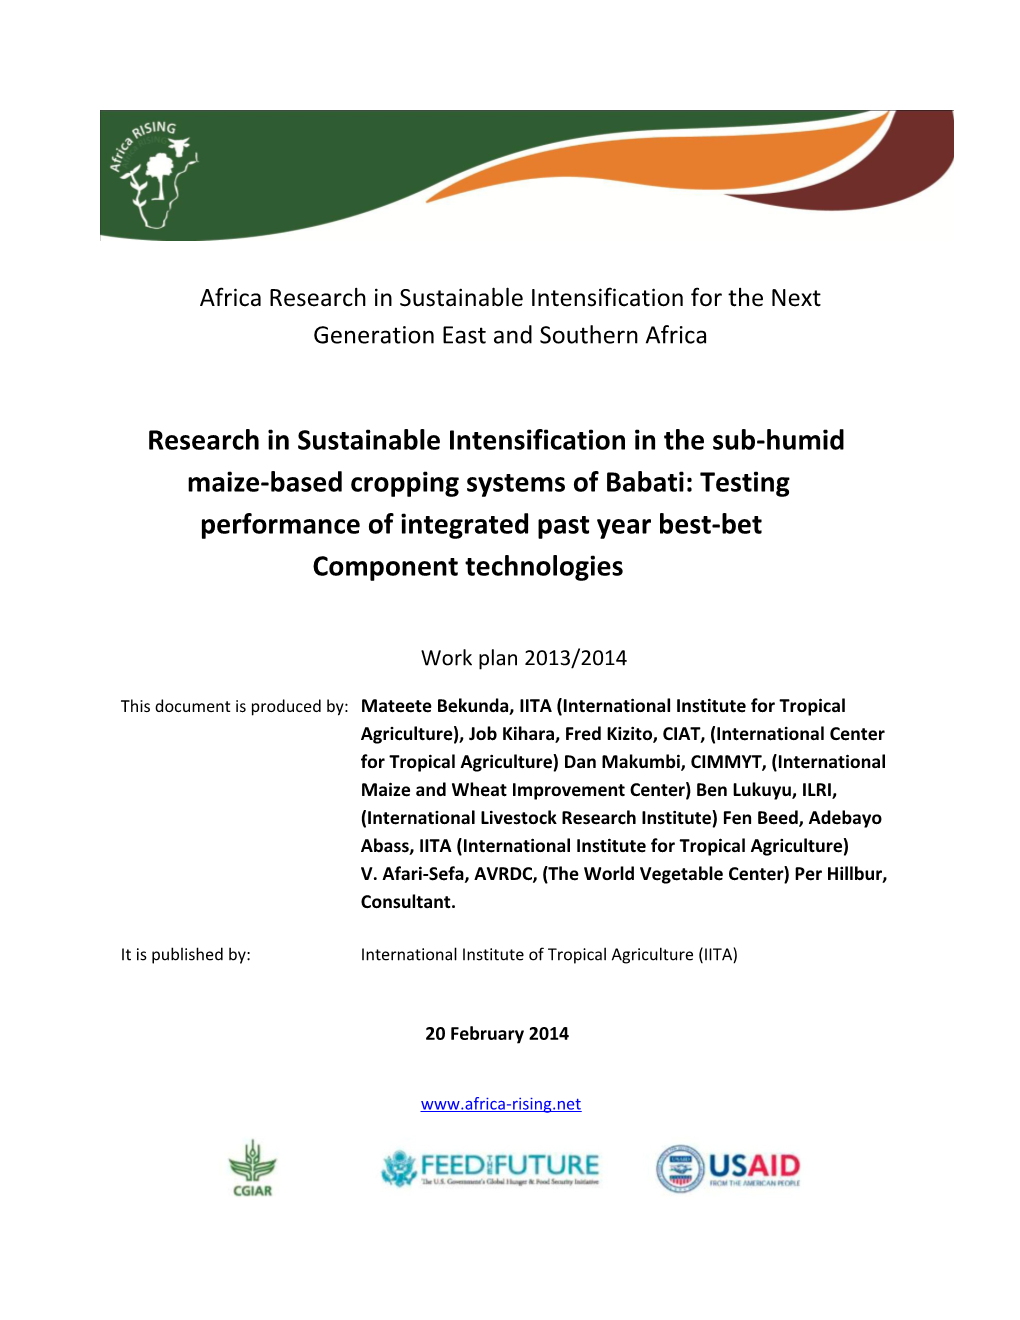 Africa Research in Sustainable Intensification for the Next